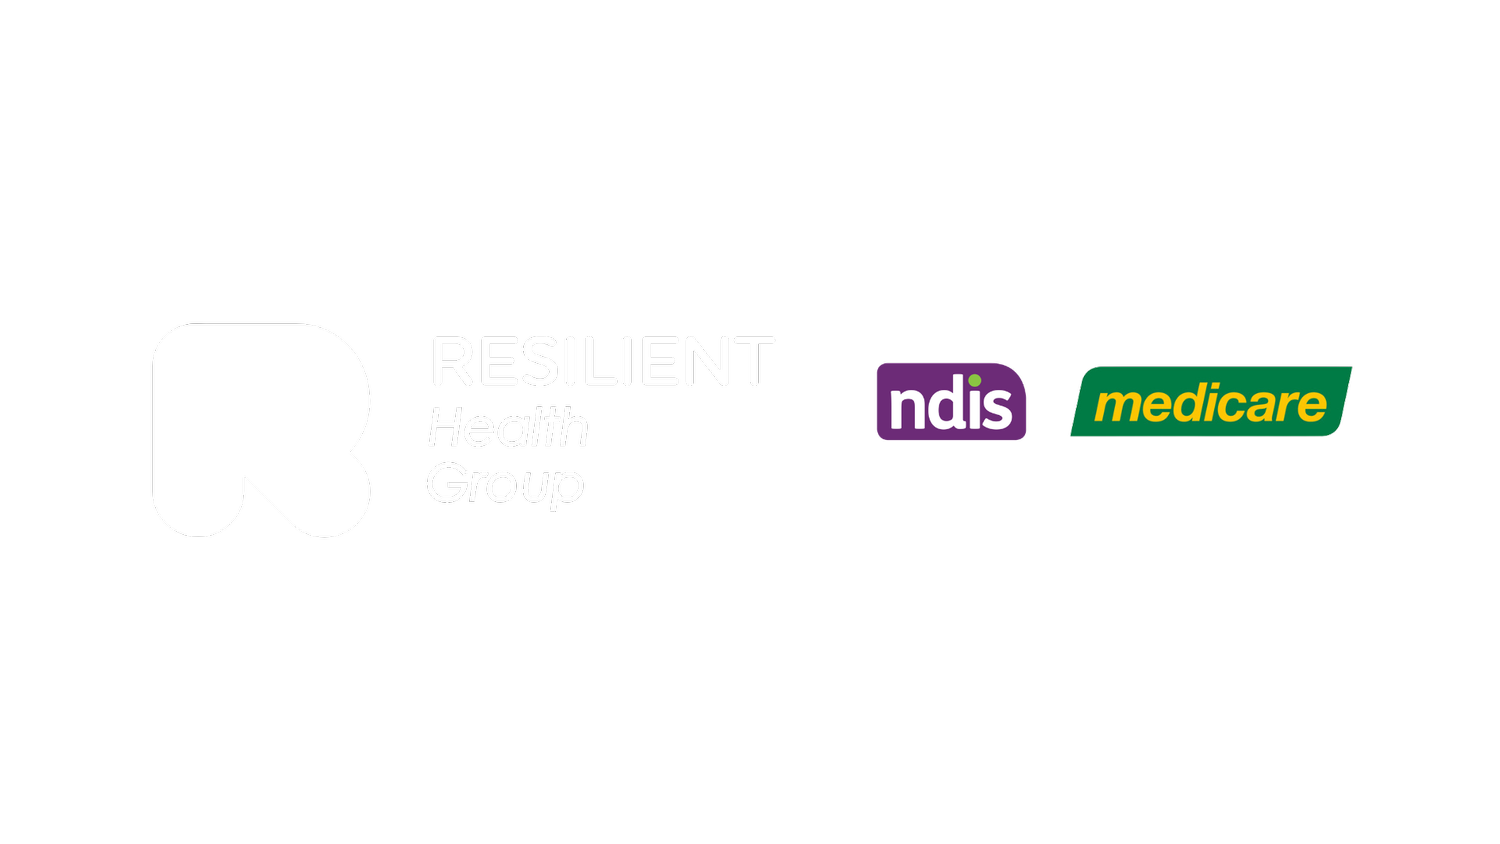 Resilient Health Group